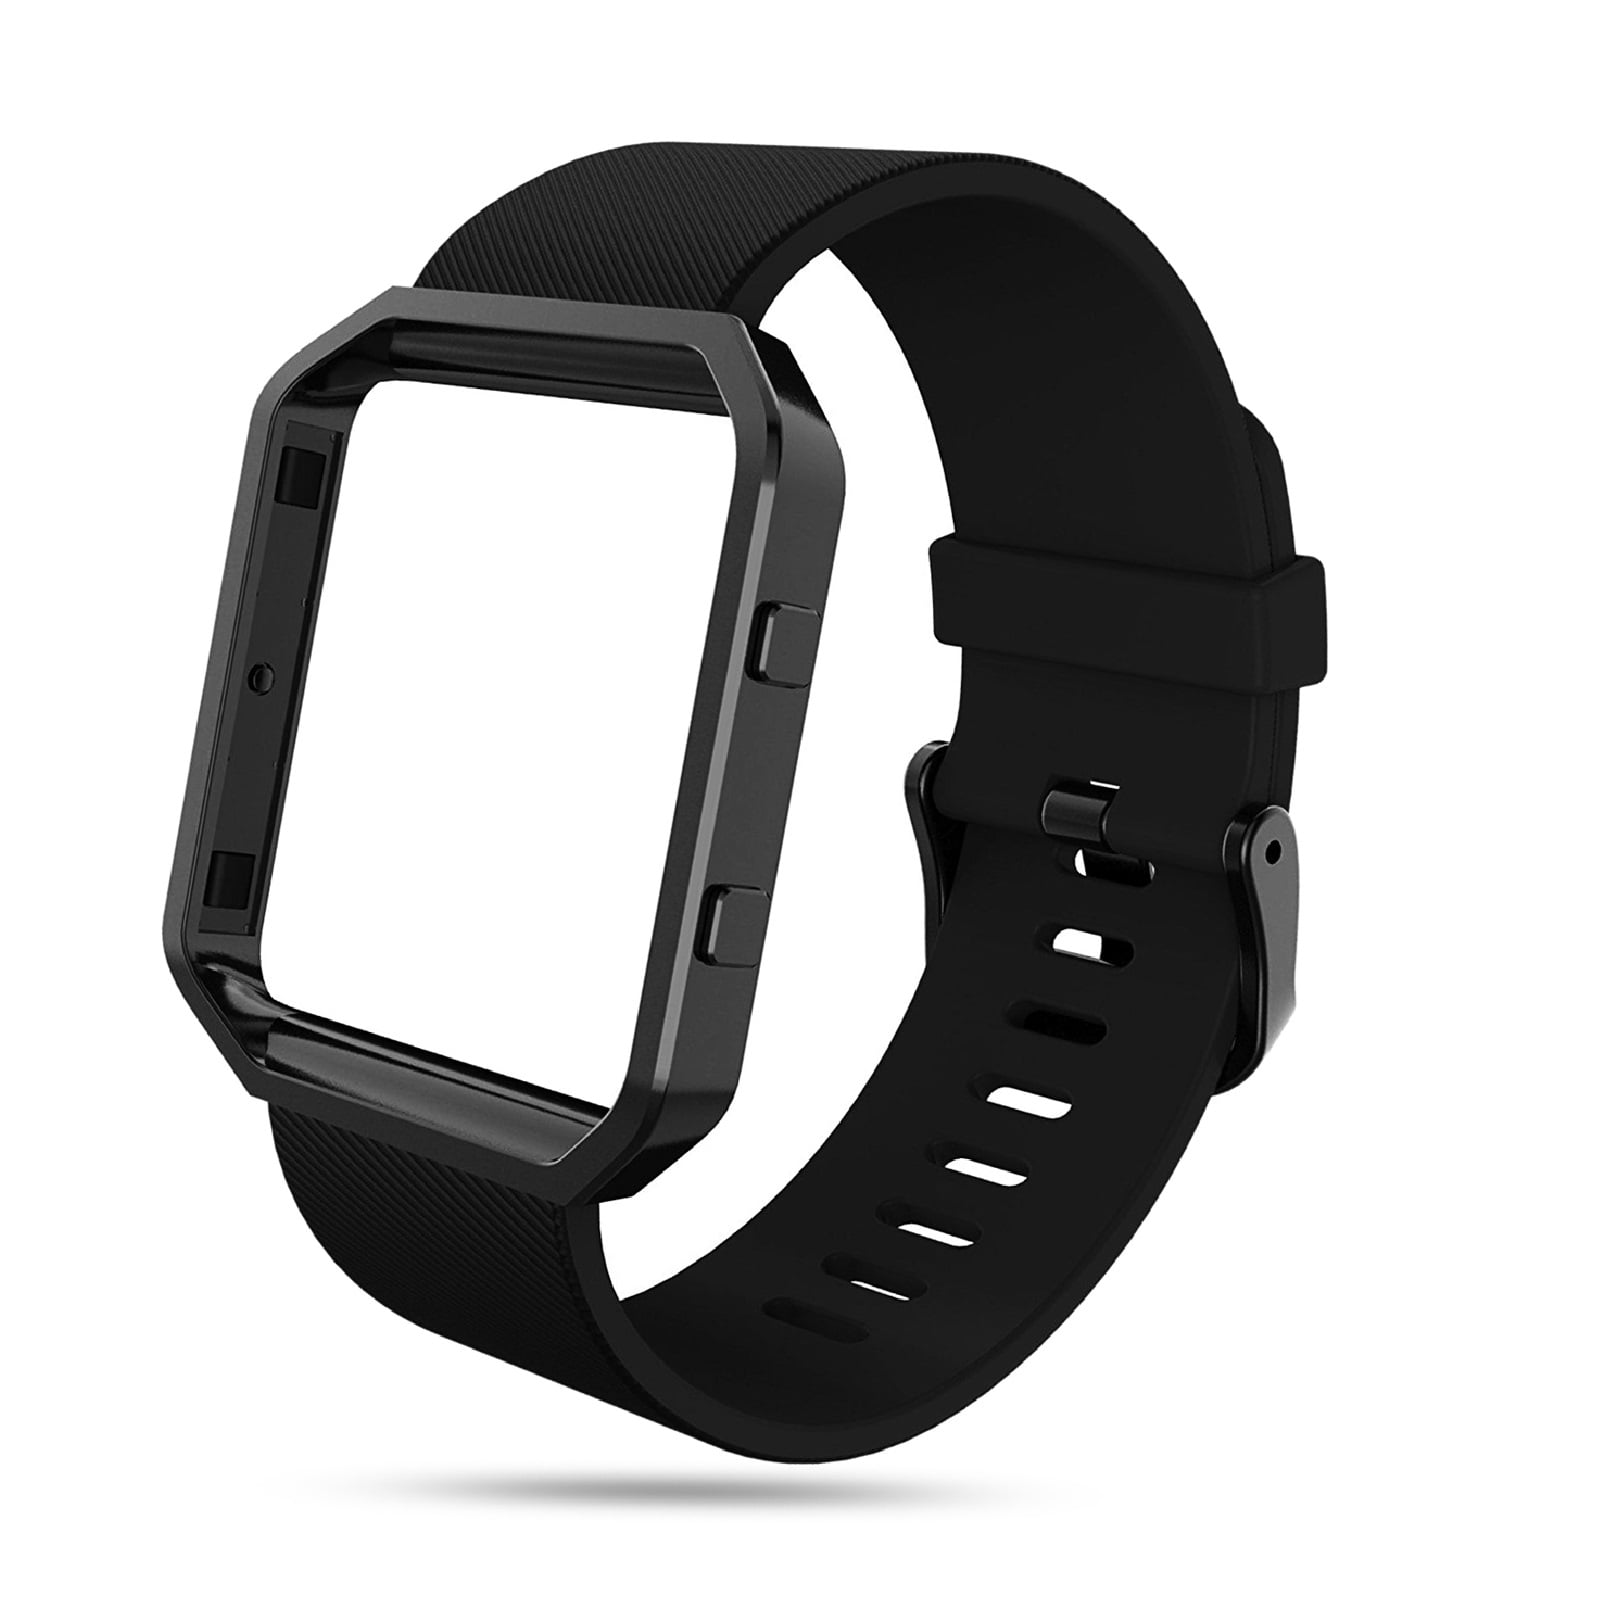 Frame For FITBIT BLAZE BLACK ARMOR New Replacement Large Wristband Band Strap 